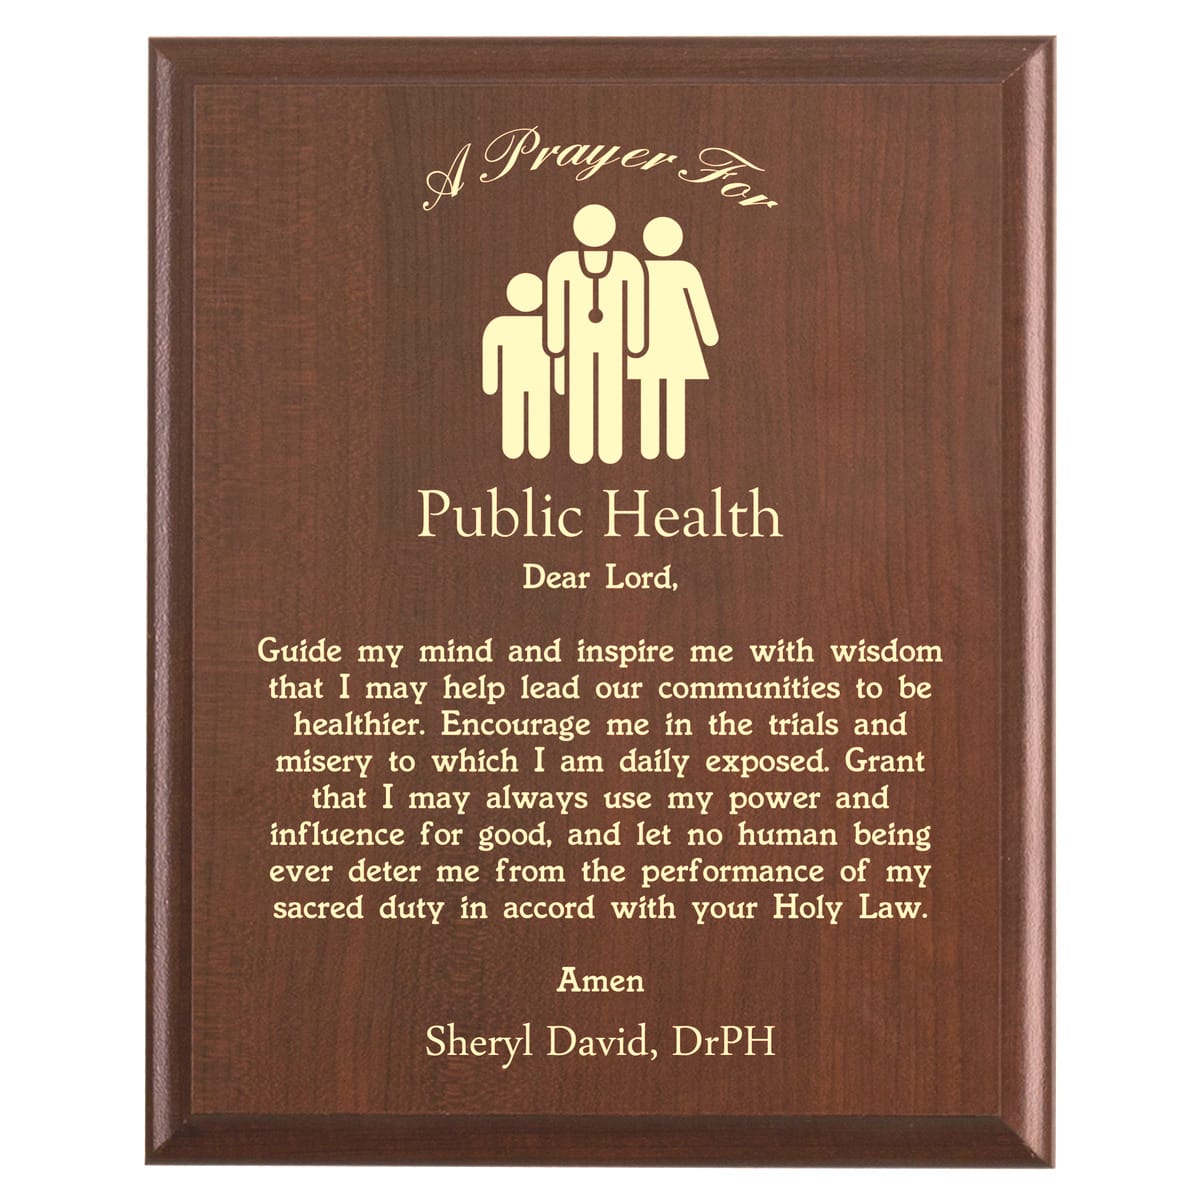 Plaque photo: Public Health Prayer Plaque design with free personalization. Wood style finish with customized text.